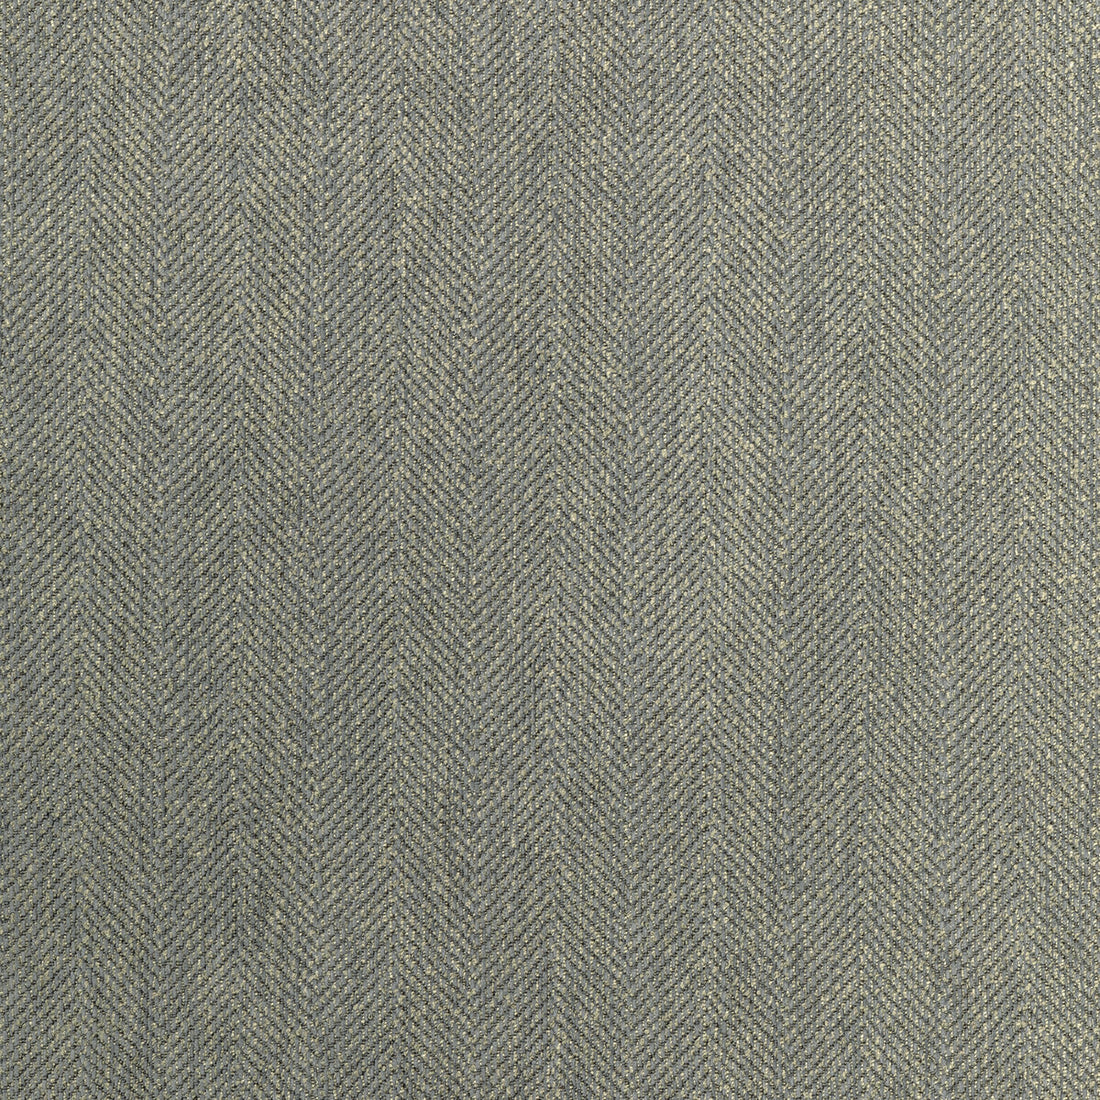 Healing Touch fabric in moon shadow color - pattern 36389.2111.0 - by Kravet Design in the Crypton Home - Celliant collection